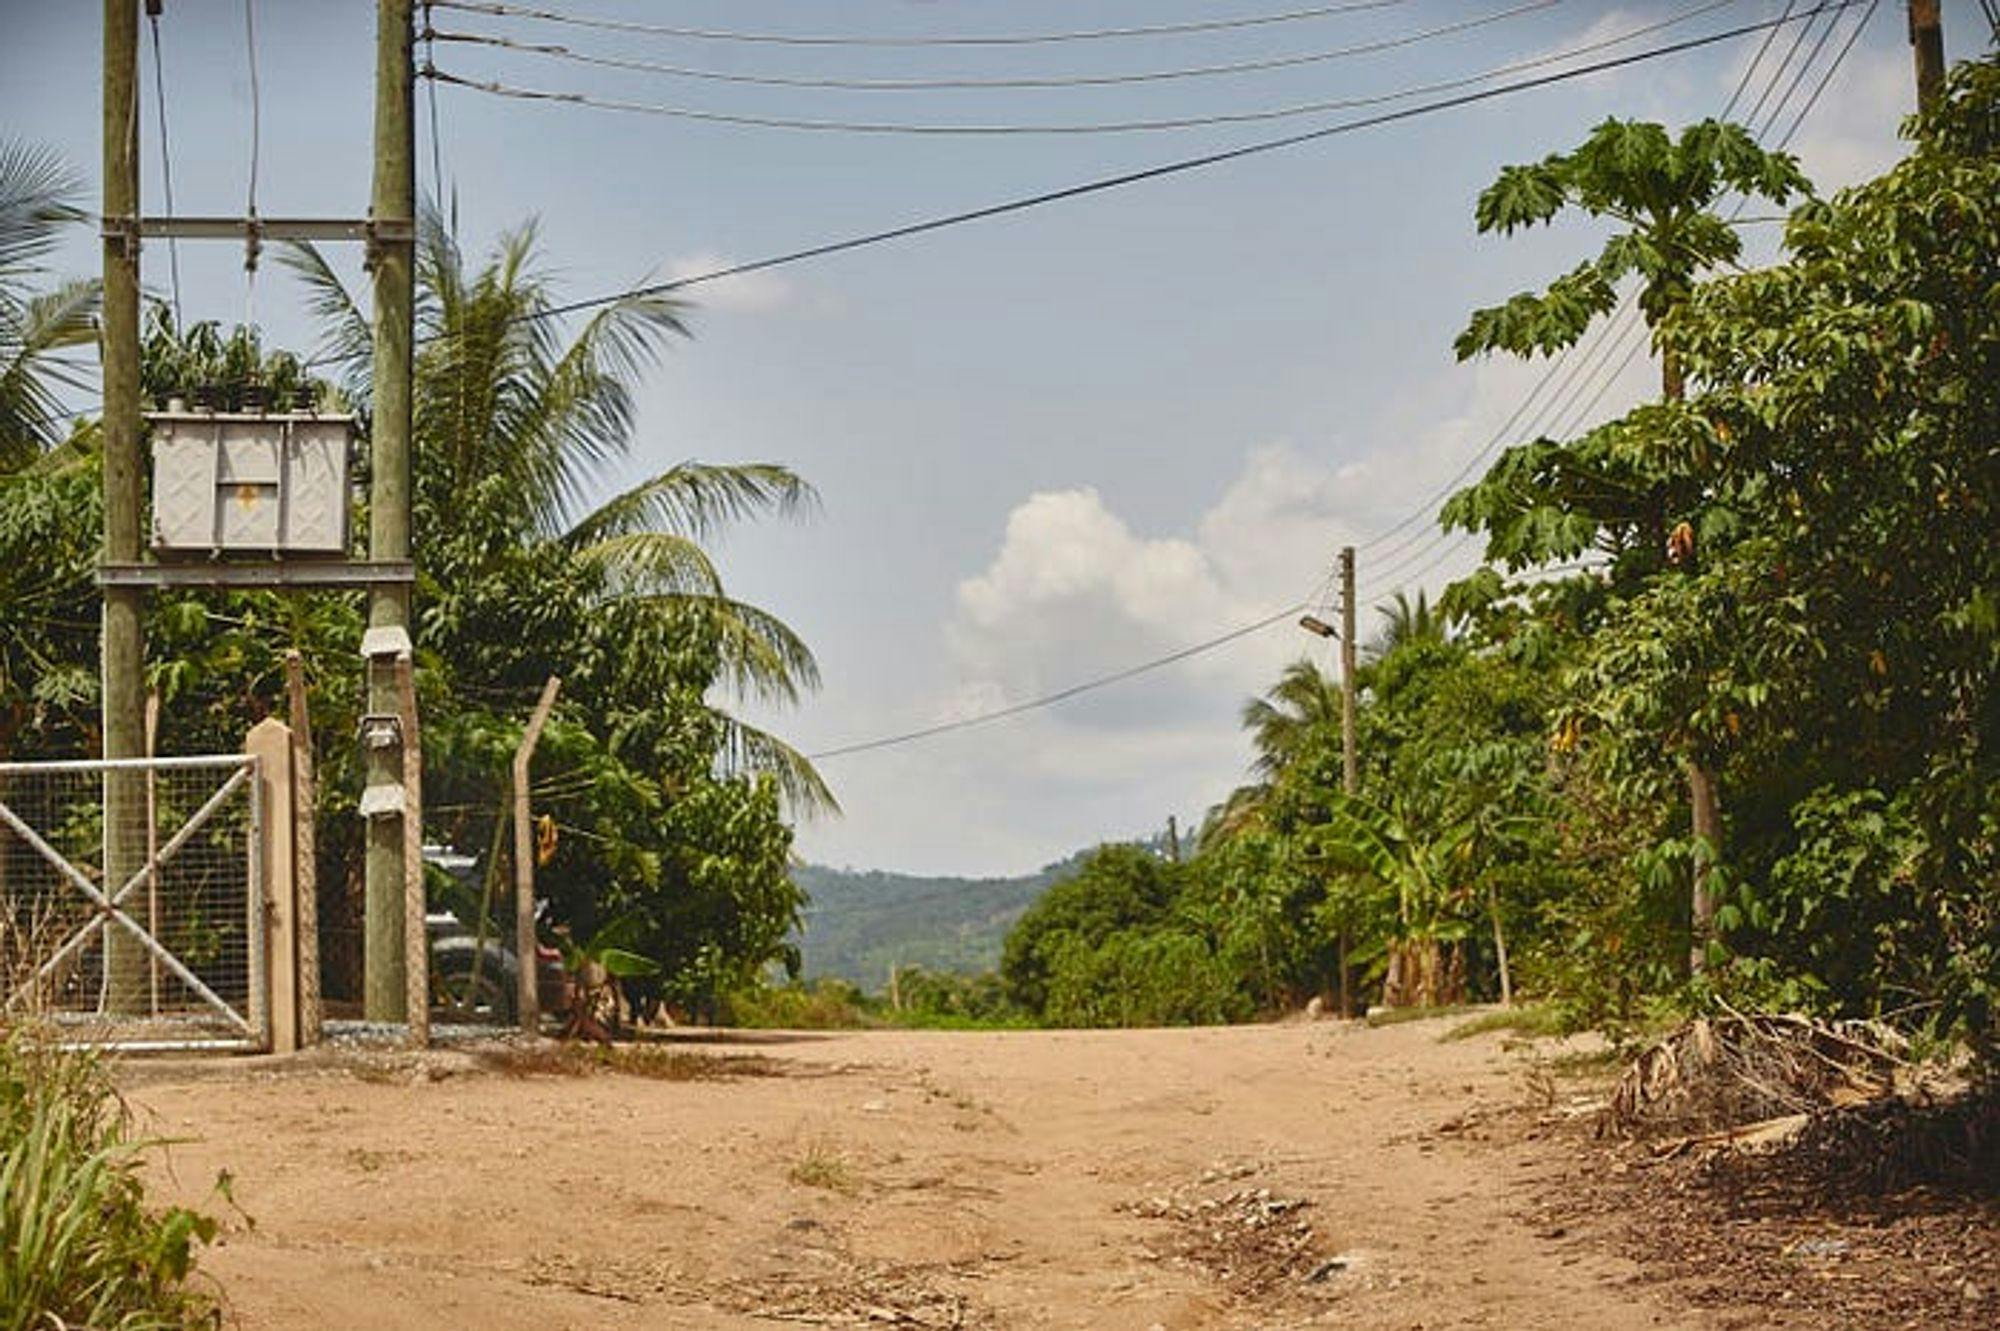 An area in Accra, Ghana where we are using PowerWatch to measure grid reliability. 